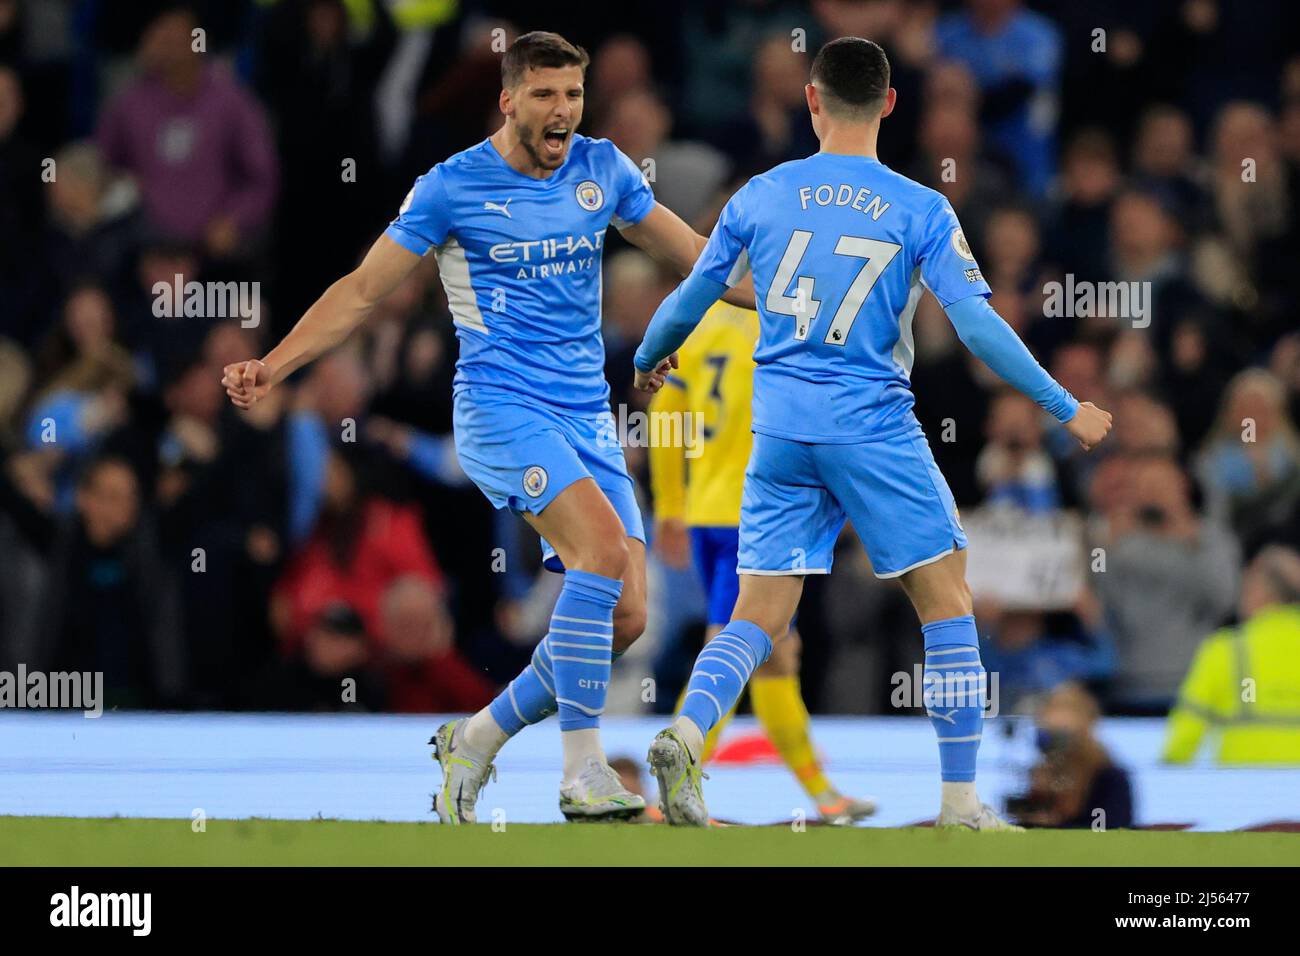 Ruben Dias #3 of Manchester City celebrates a goal by Phil Foden #47 of Manchester City to make it 2-0 Stock Photo